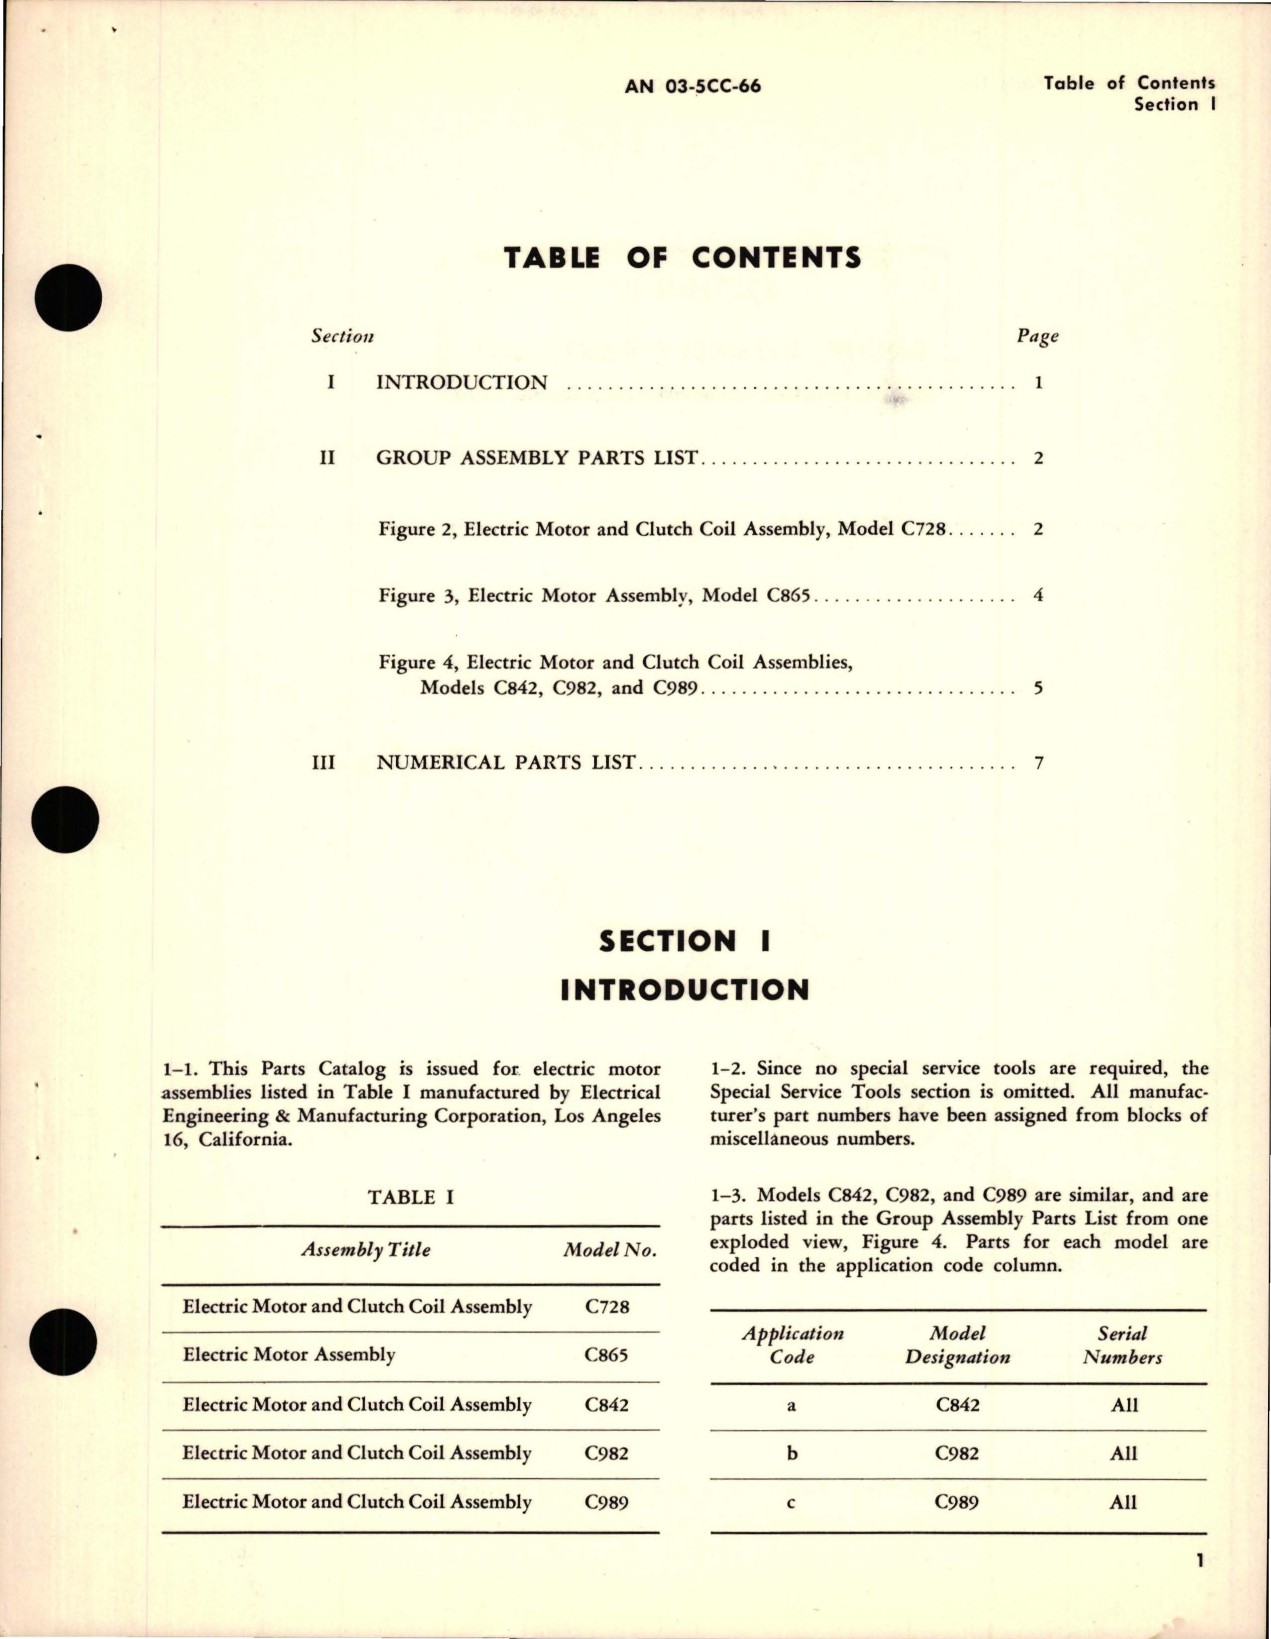 Sample page 5 from AirCorps Library document: Parts Catalog for Electric Motors 